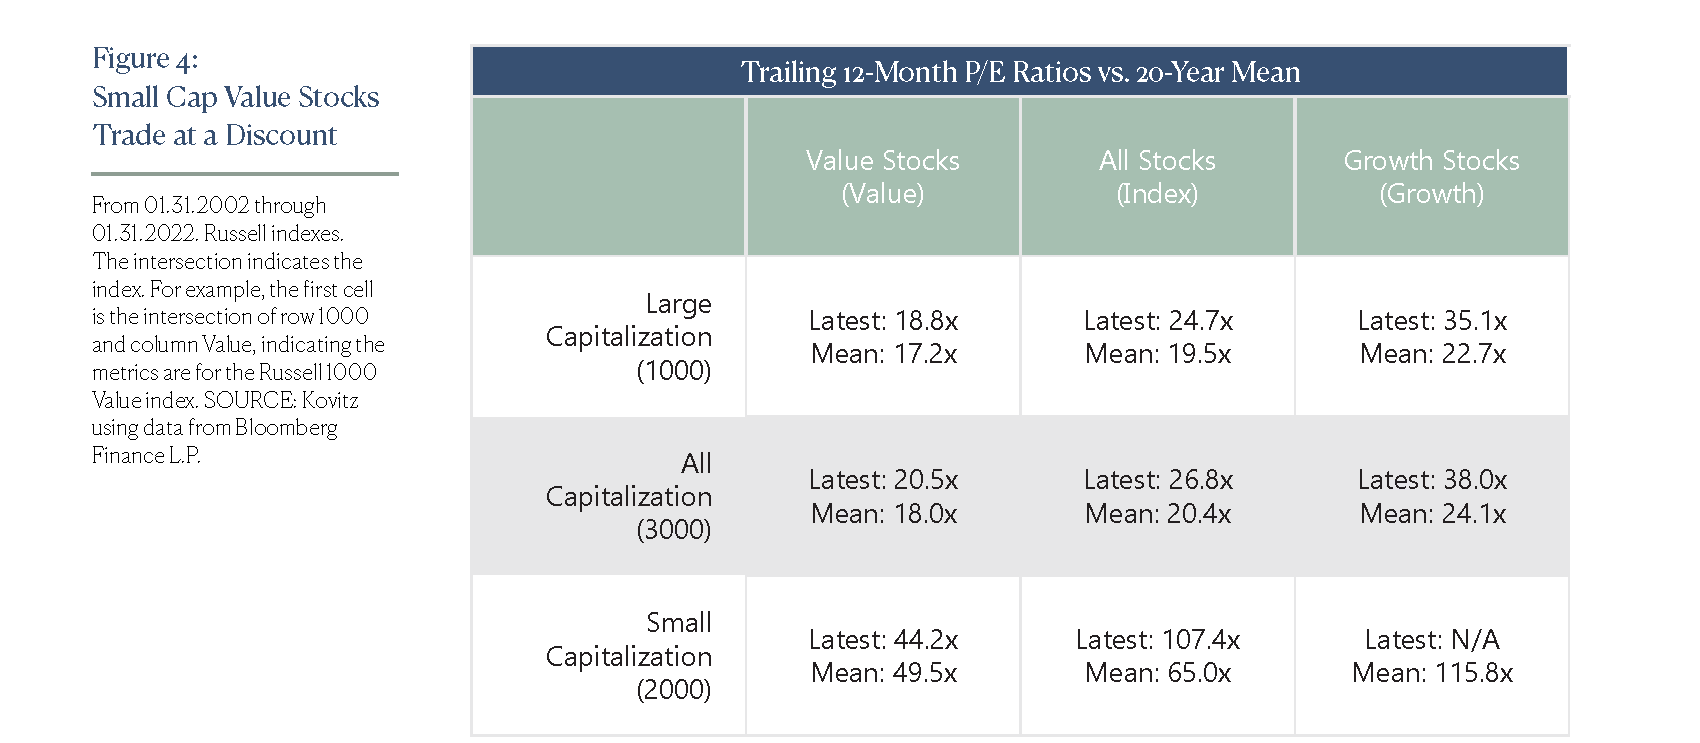 Small Cap Value Stocks Trade at a Discount